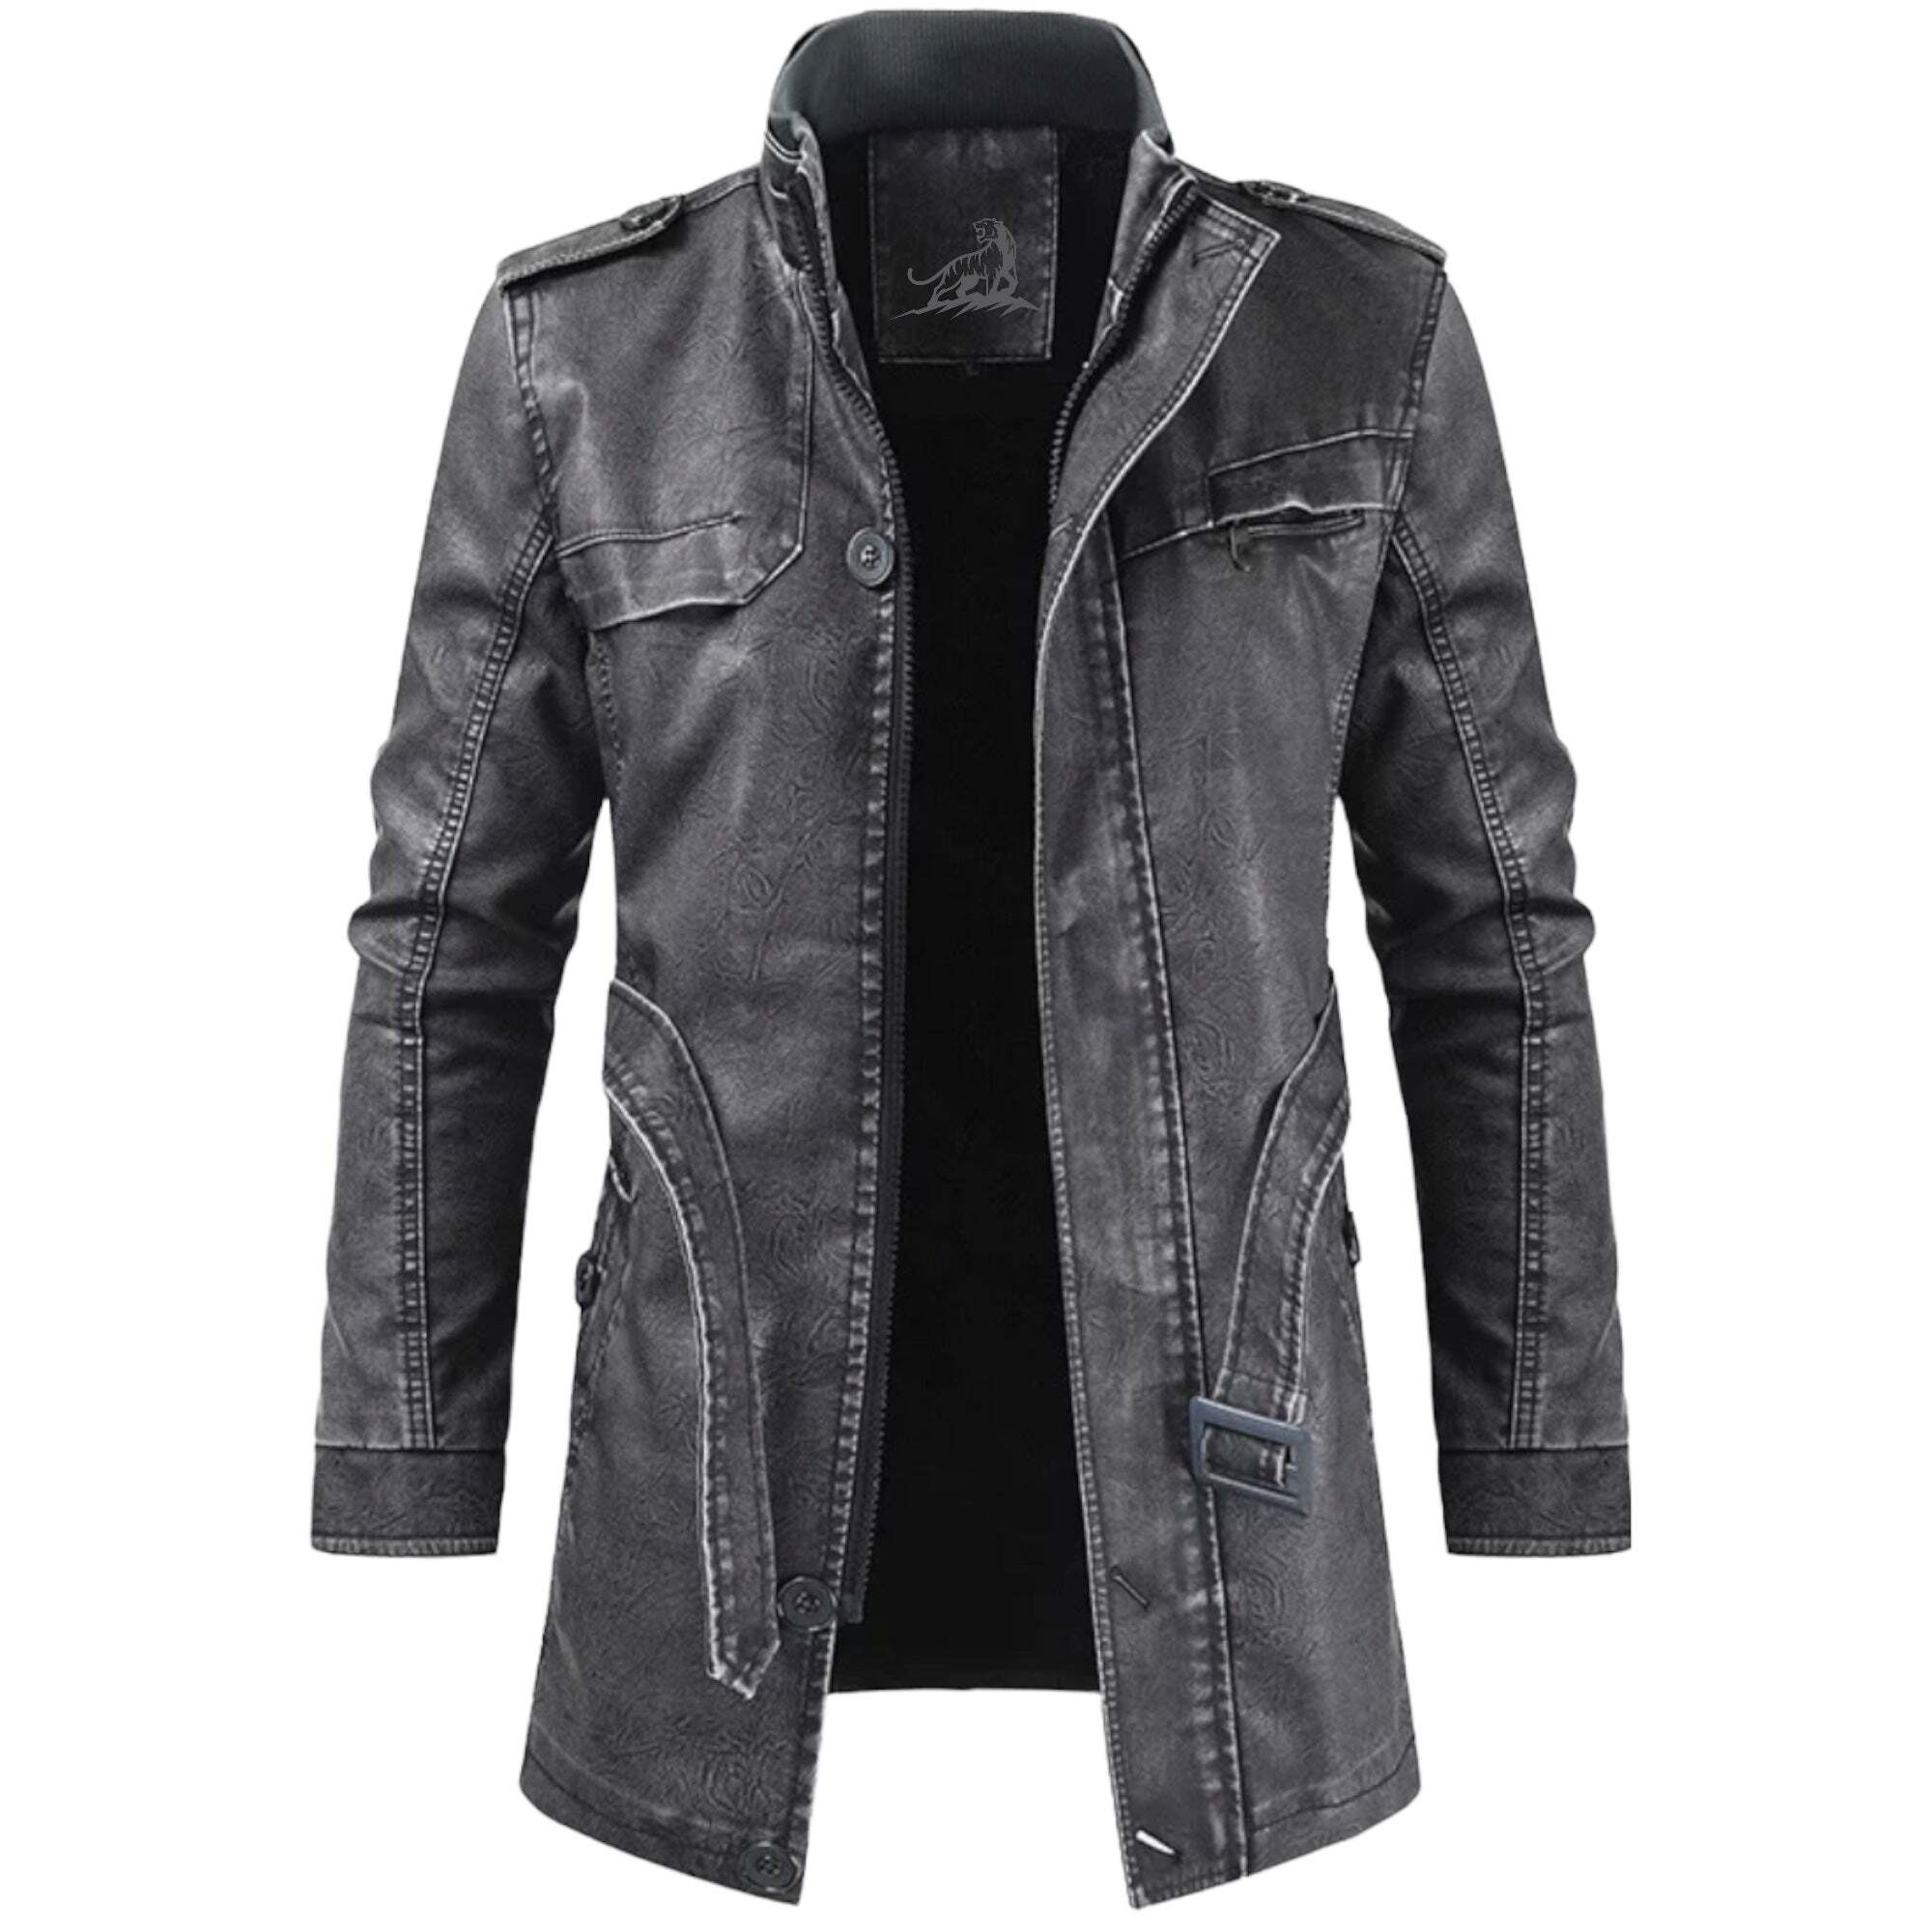 'King of Kings' Leather Jacket